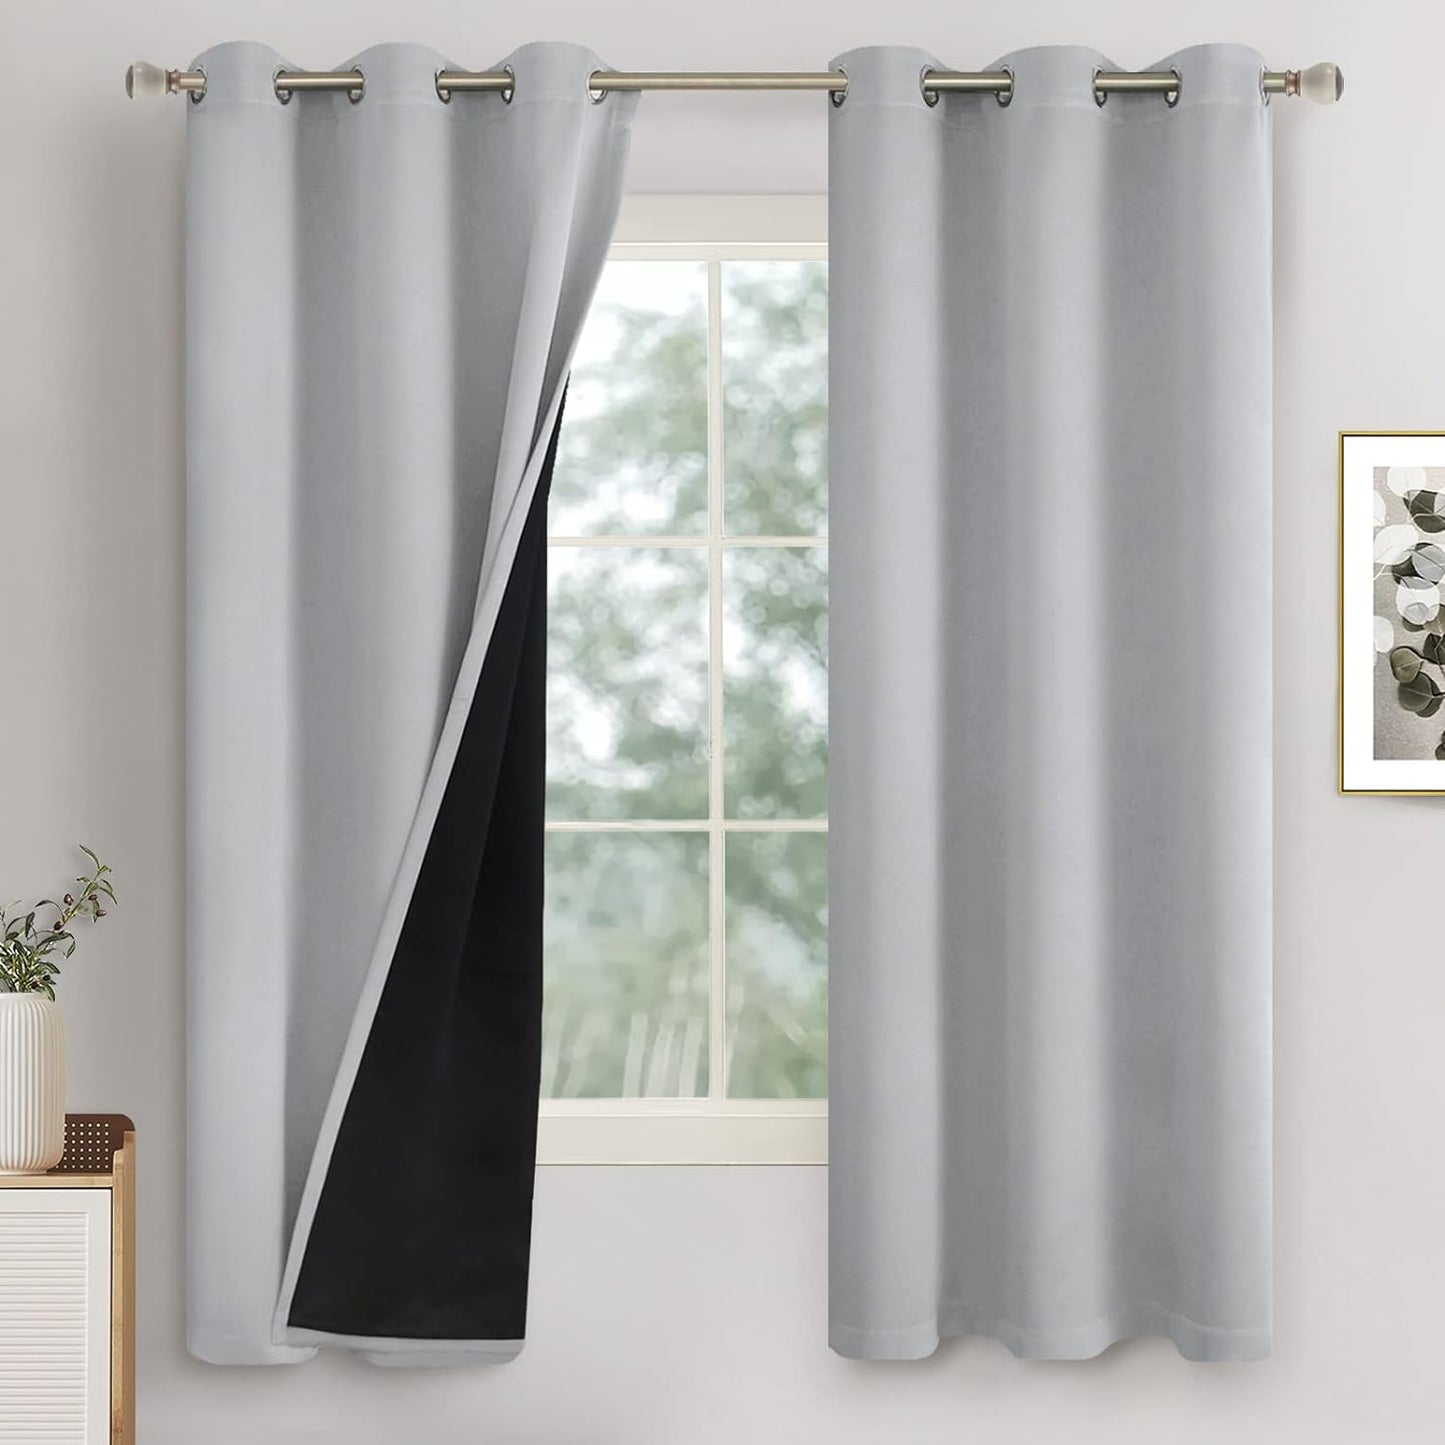 QUEMAS Short Blackout Curtains 54 Inch Length 2 Panels, 100% Light Blocking Thermal Insulated Soundproof Grommet Small Window Curtains for Bedroom Basement with Black Liner, Each 42 Inch Wide, White  QUEMAS Light Grey + Black Lining W42 X L63 